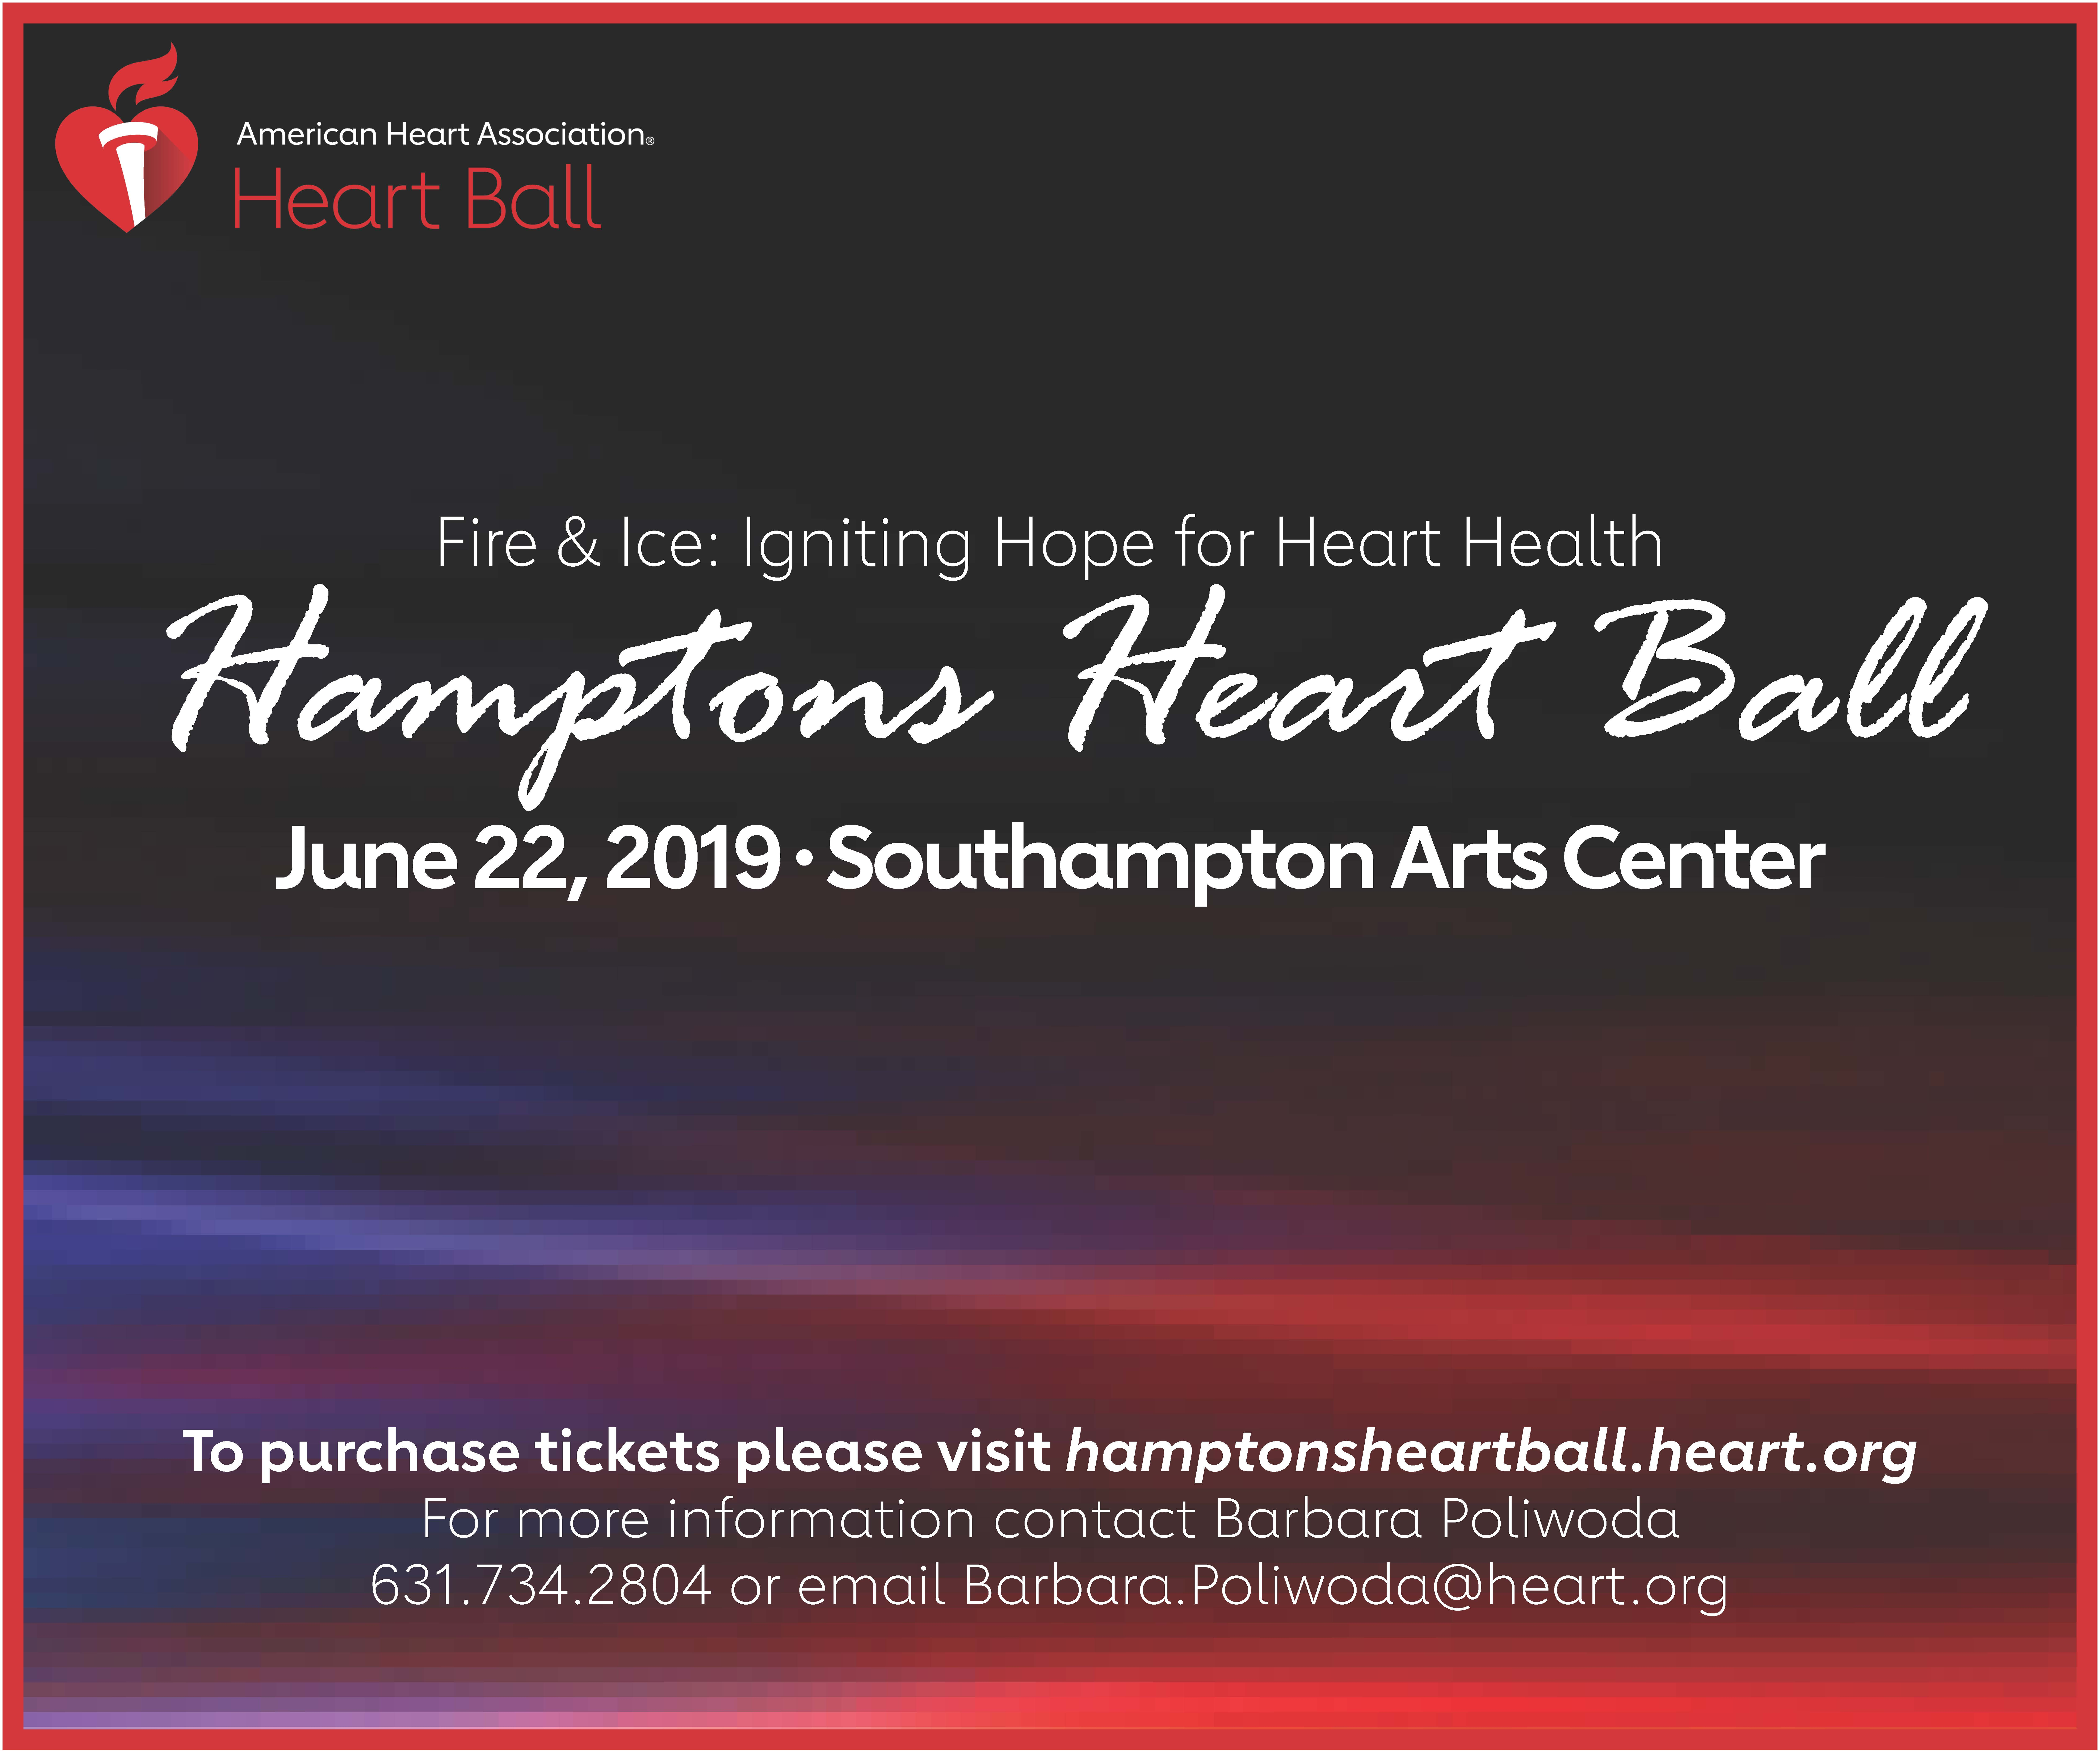 The American Heart Association’s Annual Hamptons Heart Ball Returns for its 23nd Year